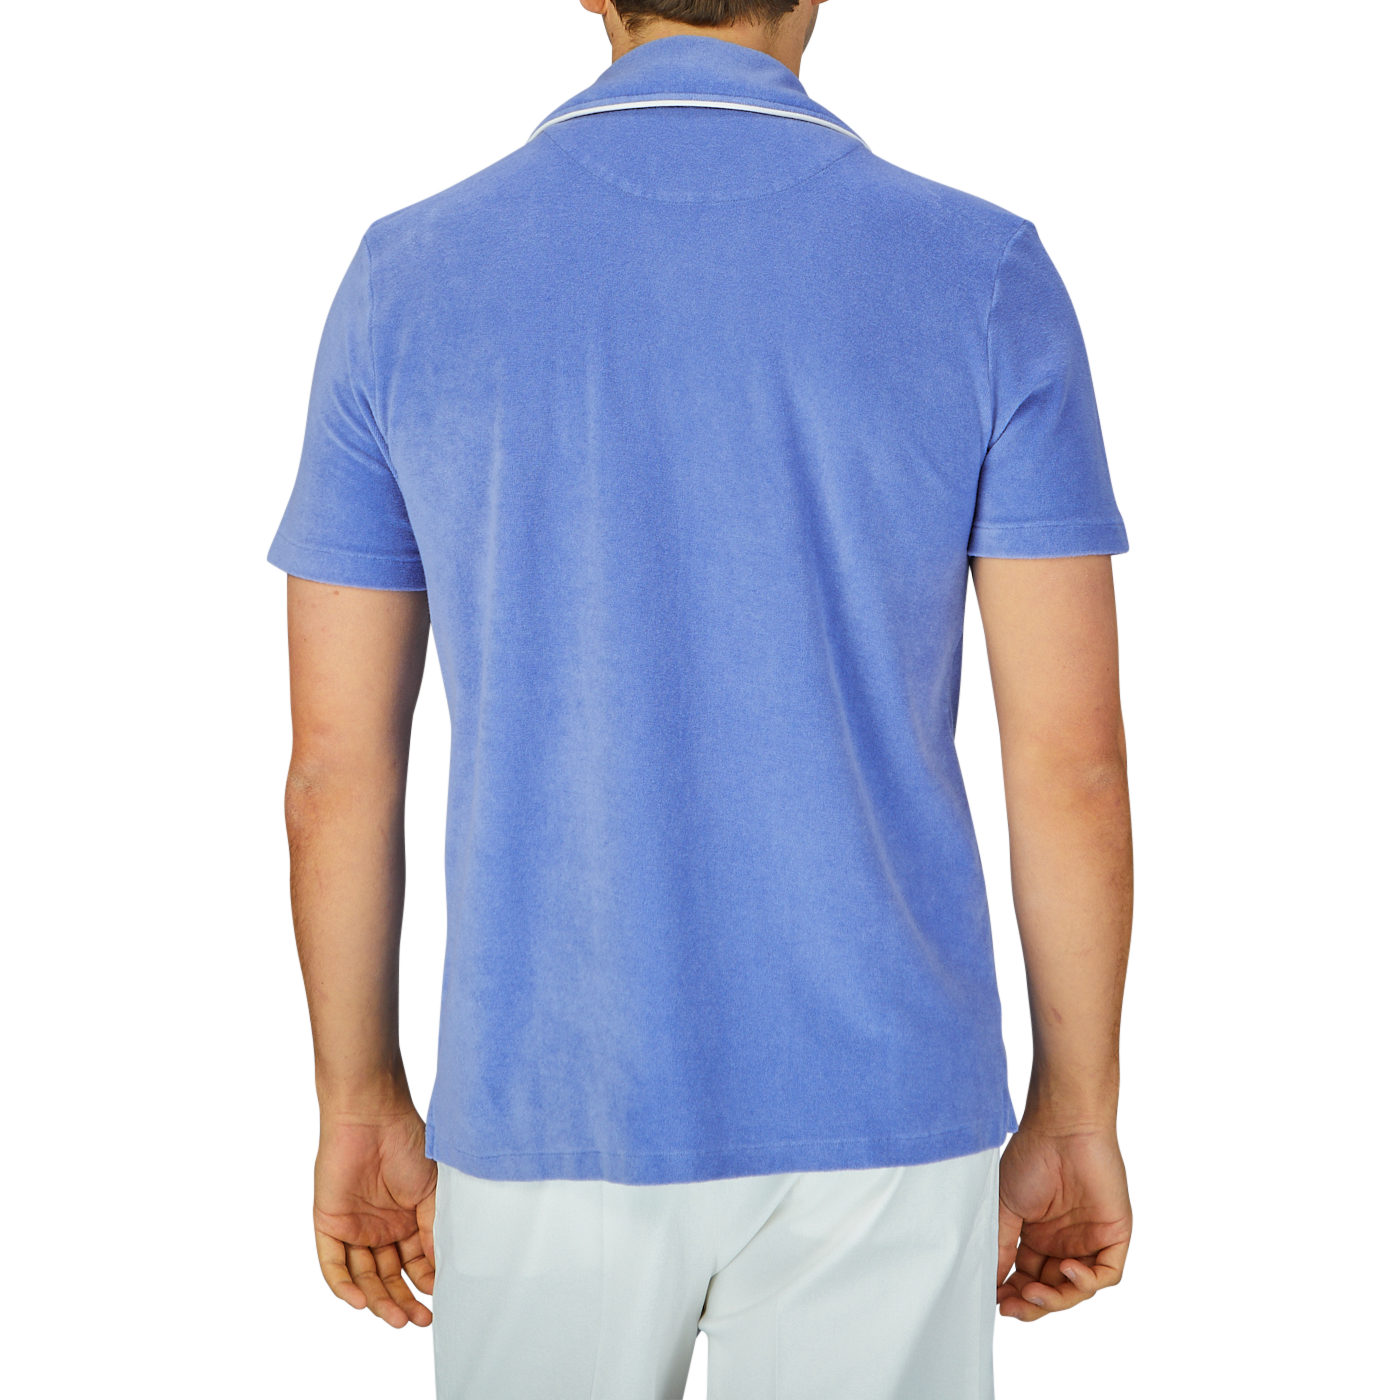 Man from behind wearing an Altea light blue cotton  Towelling Capri collar shirt and white trousers.